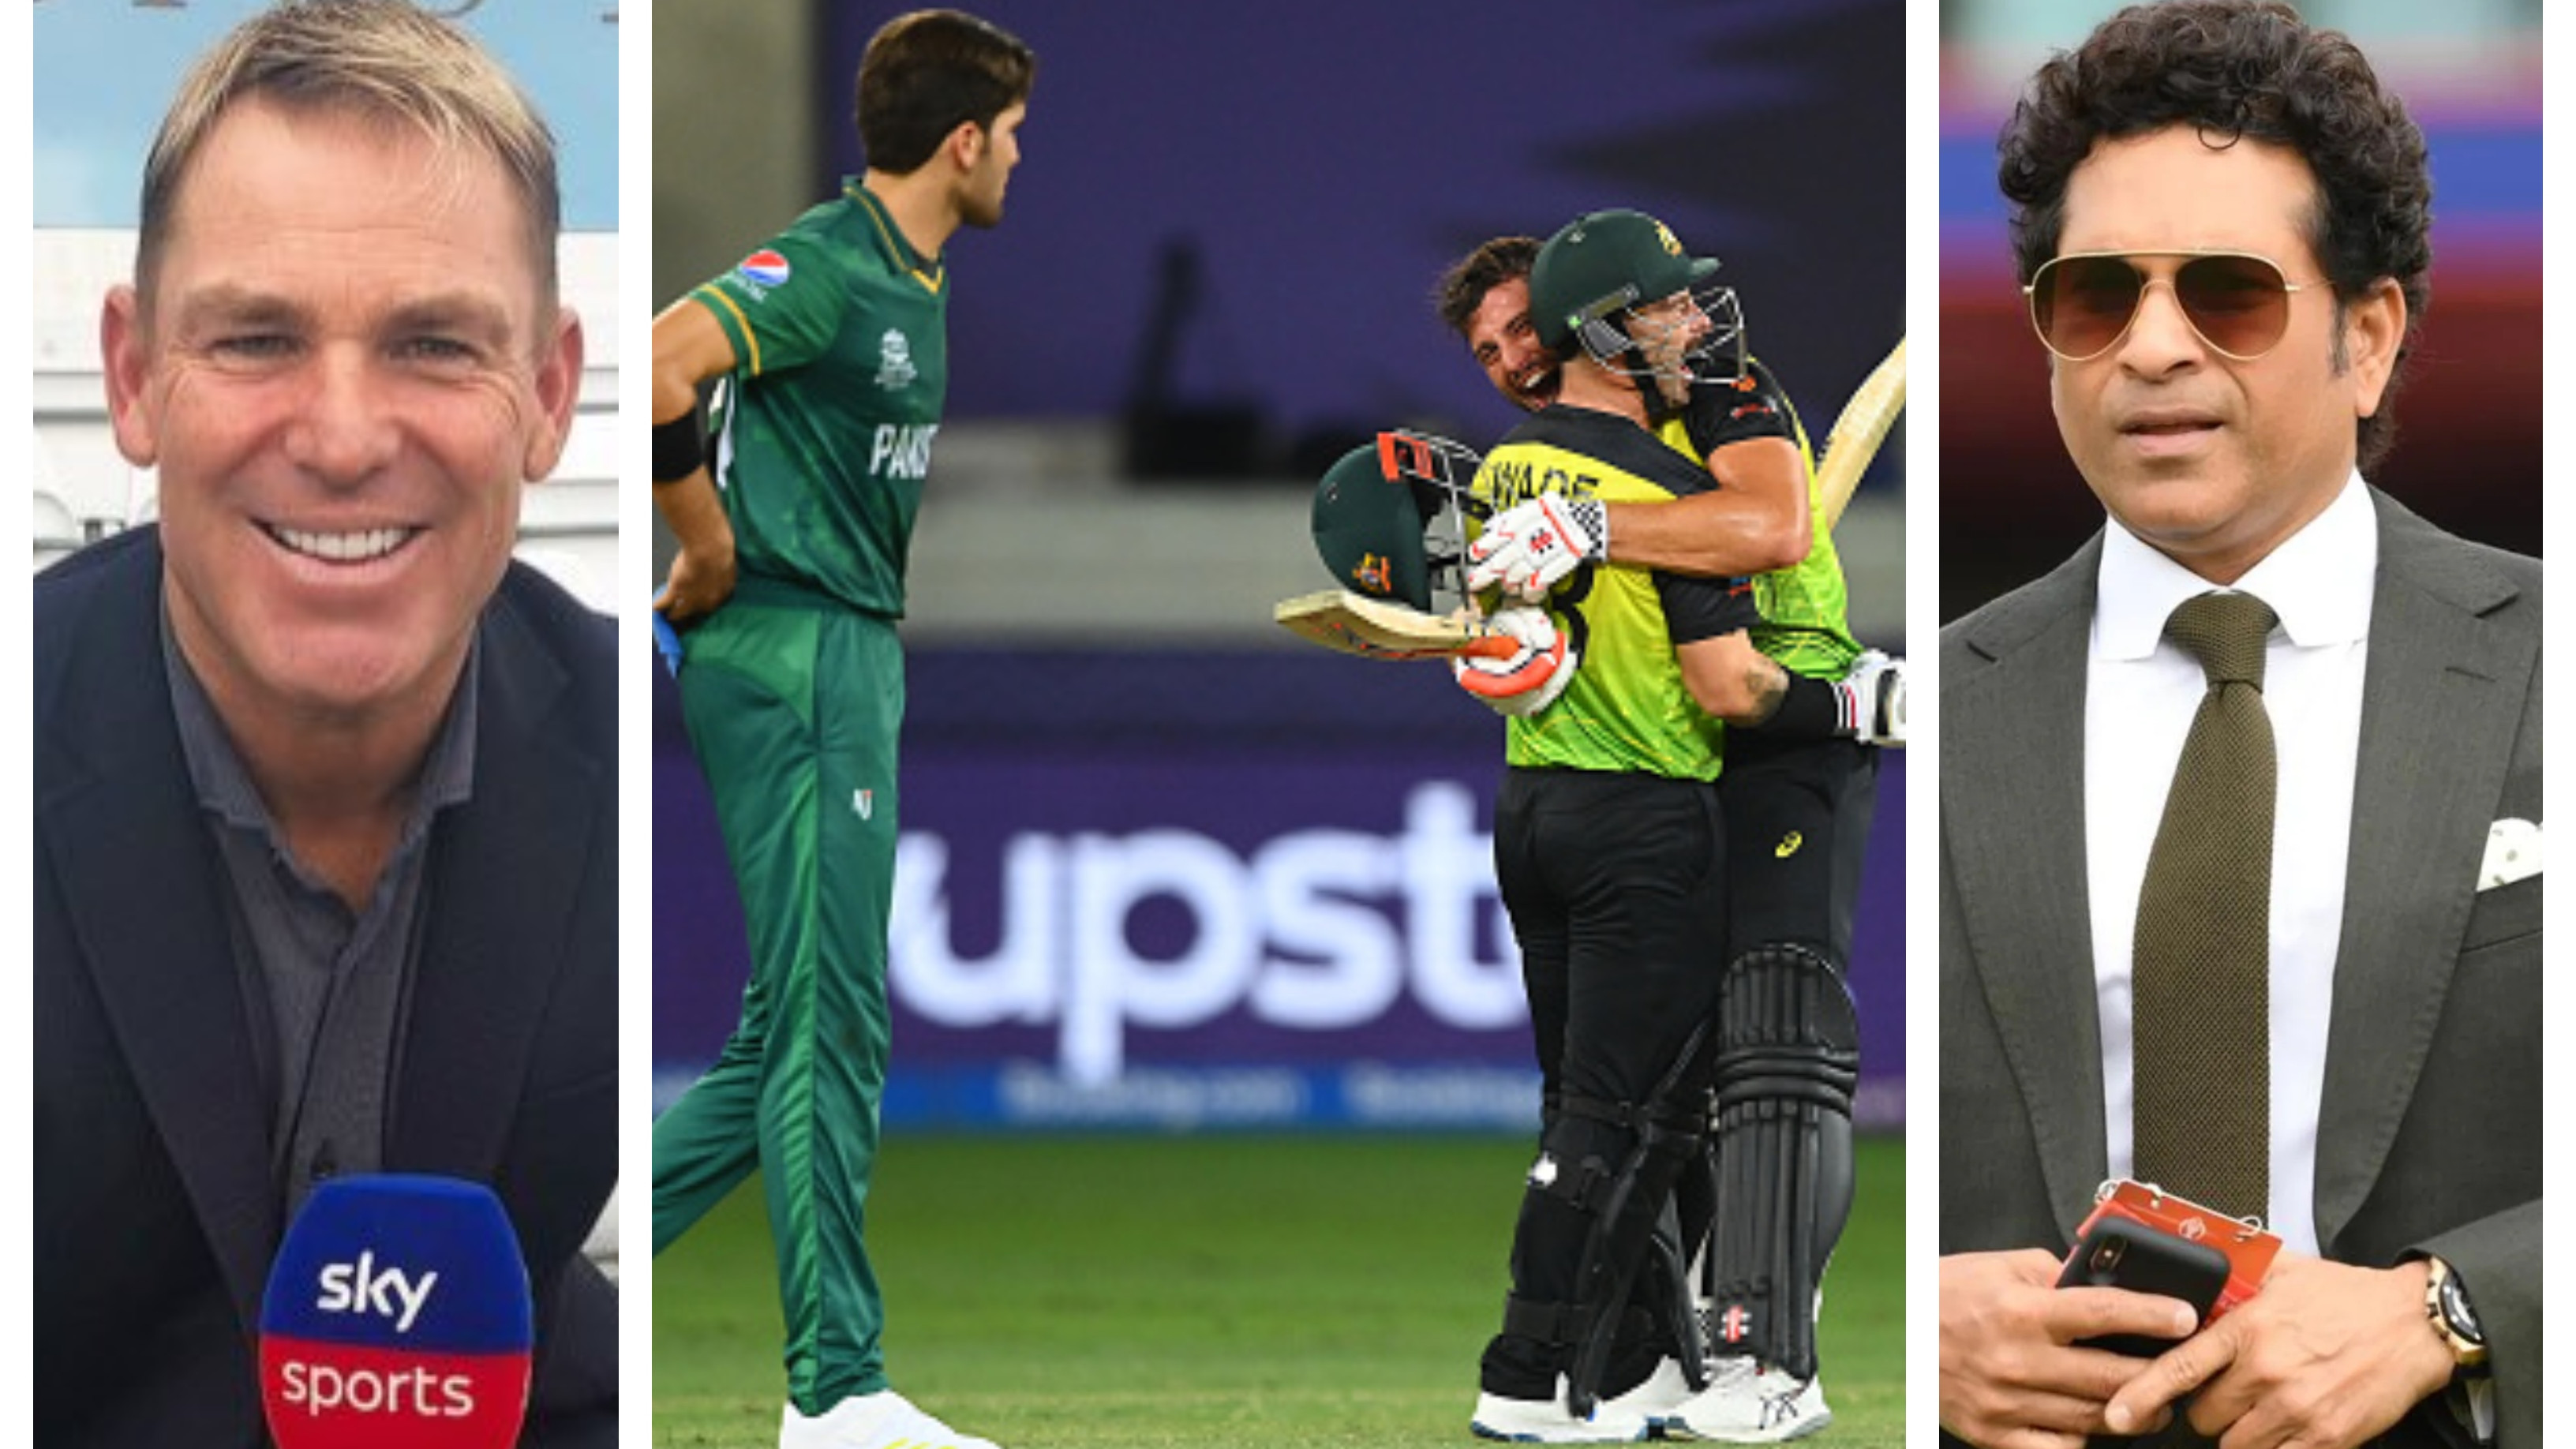 T20 World Cup 2021: Cricket fraternity reacts to Matthew Wade’s heroics as Australia edge past Pakistan in semi-final